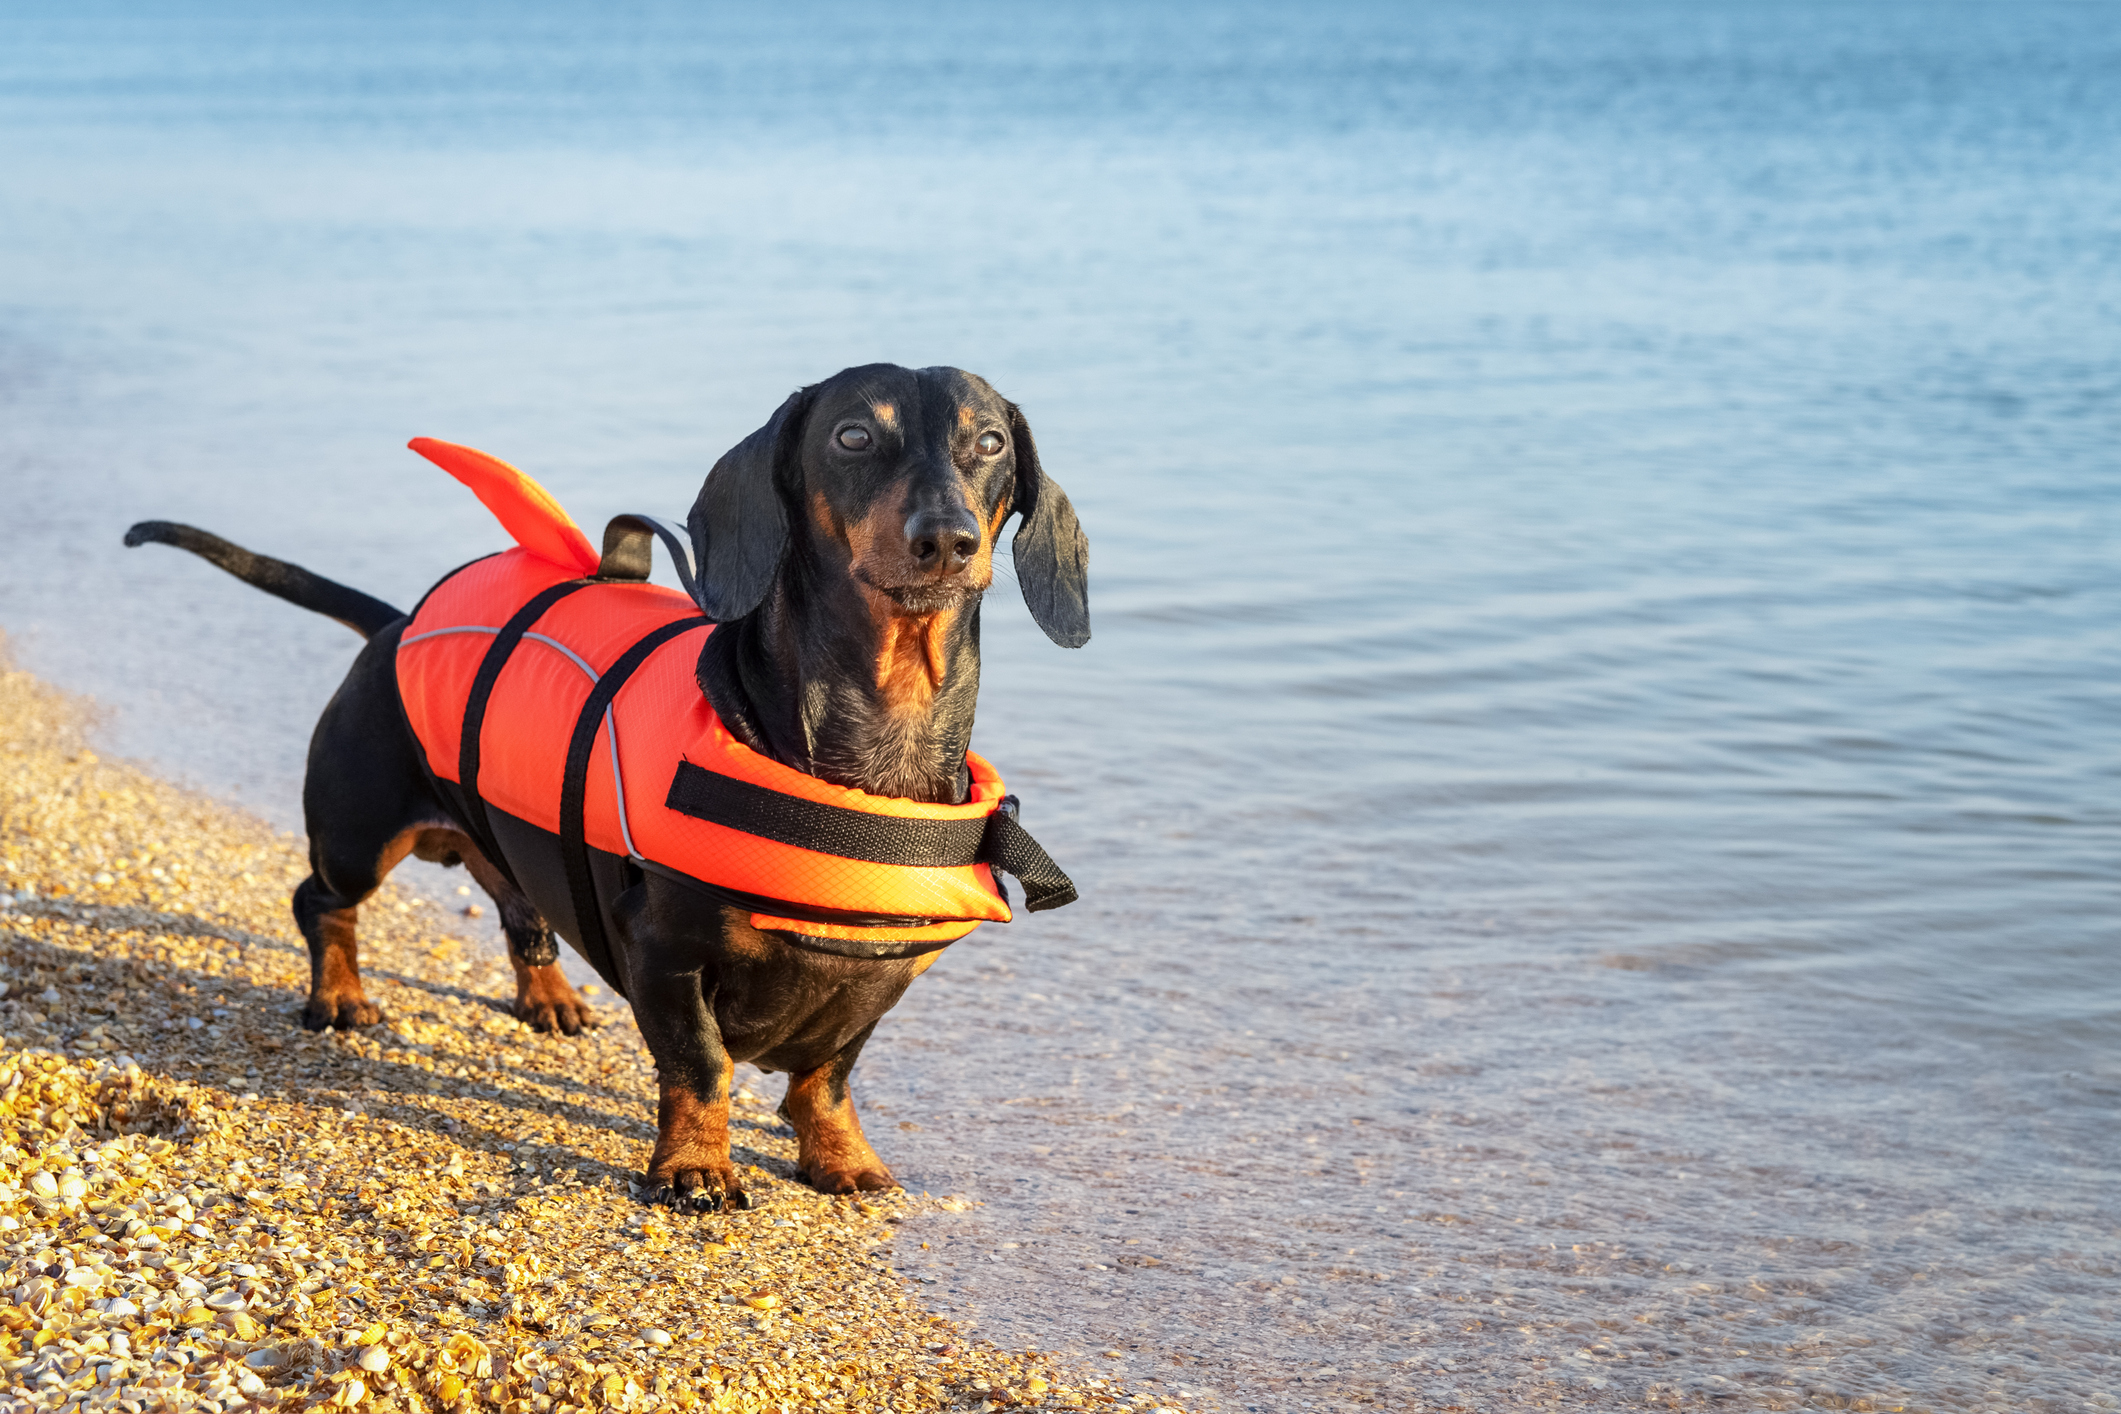 Dachshund wearing orange life jacket at the beach sets an example of pet summer safety